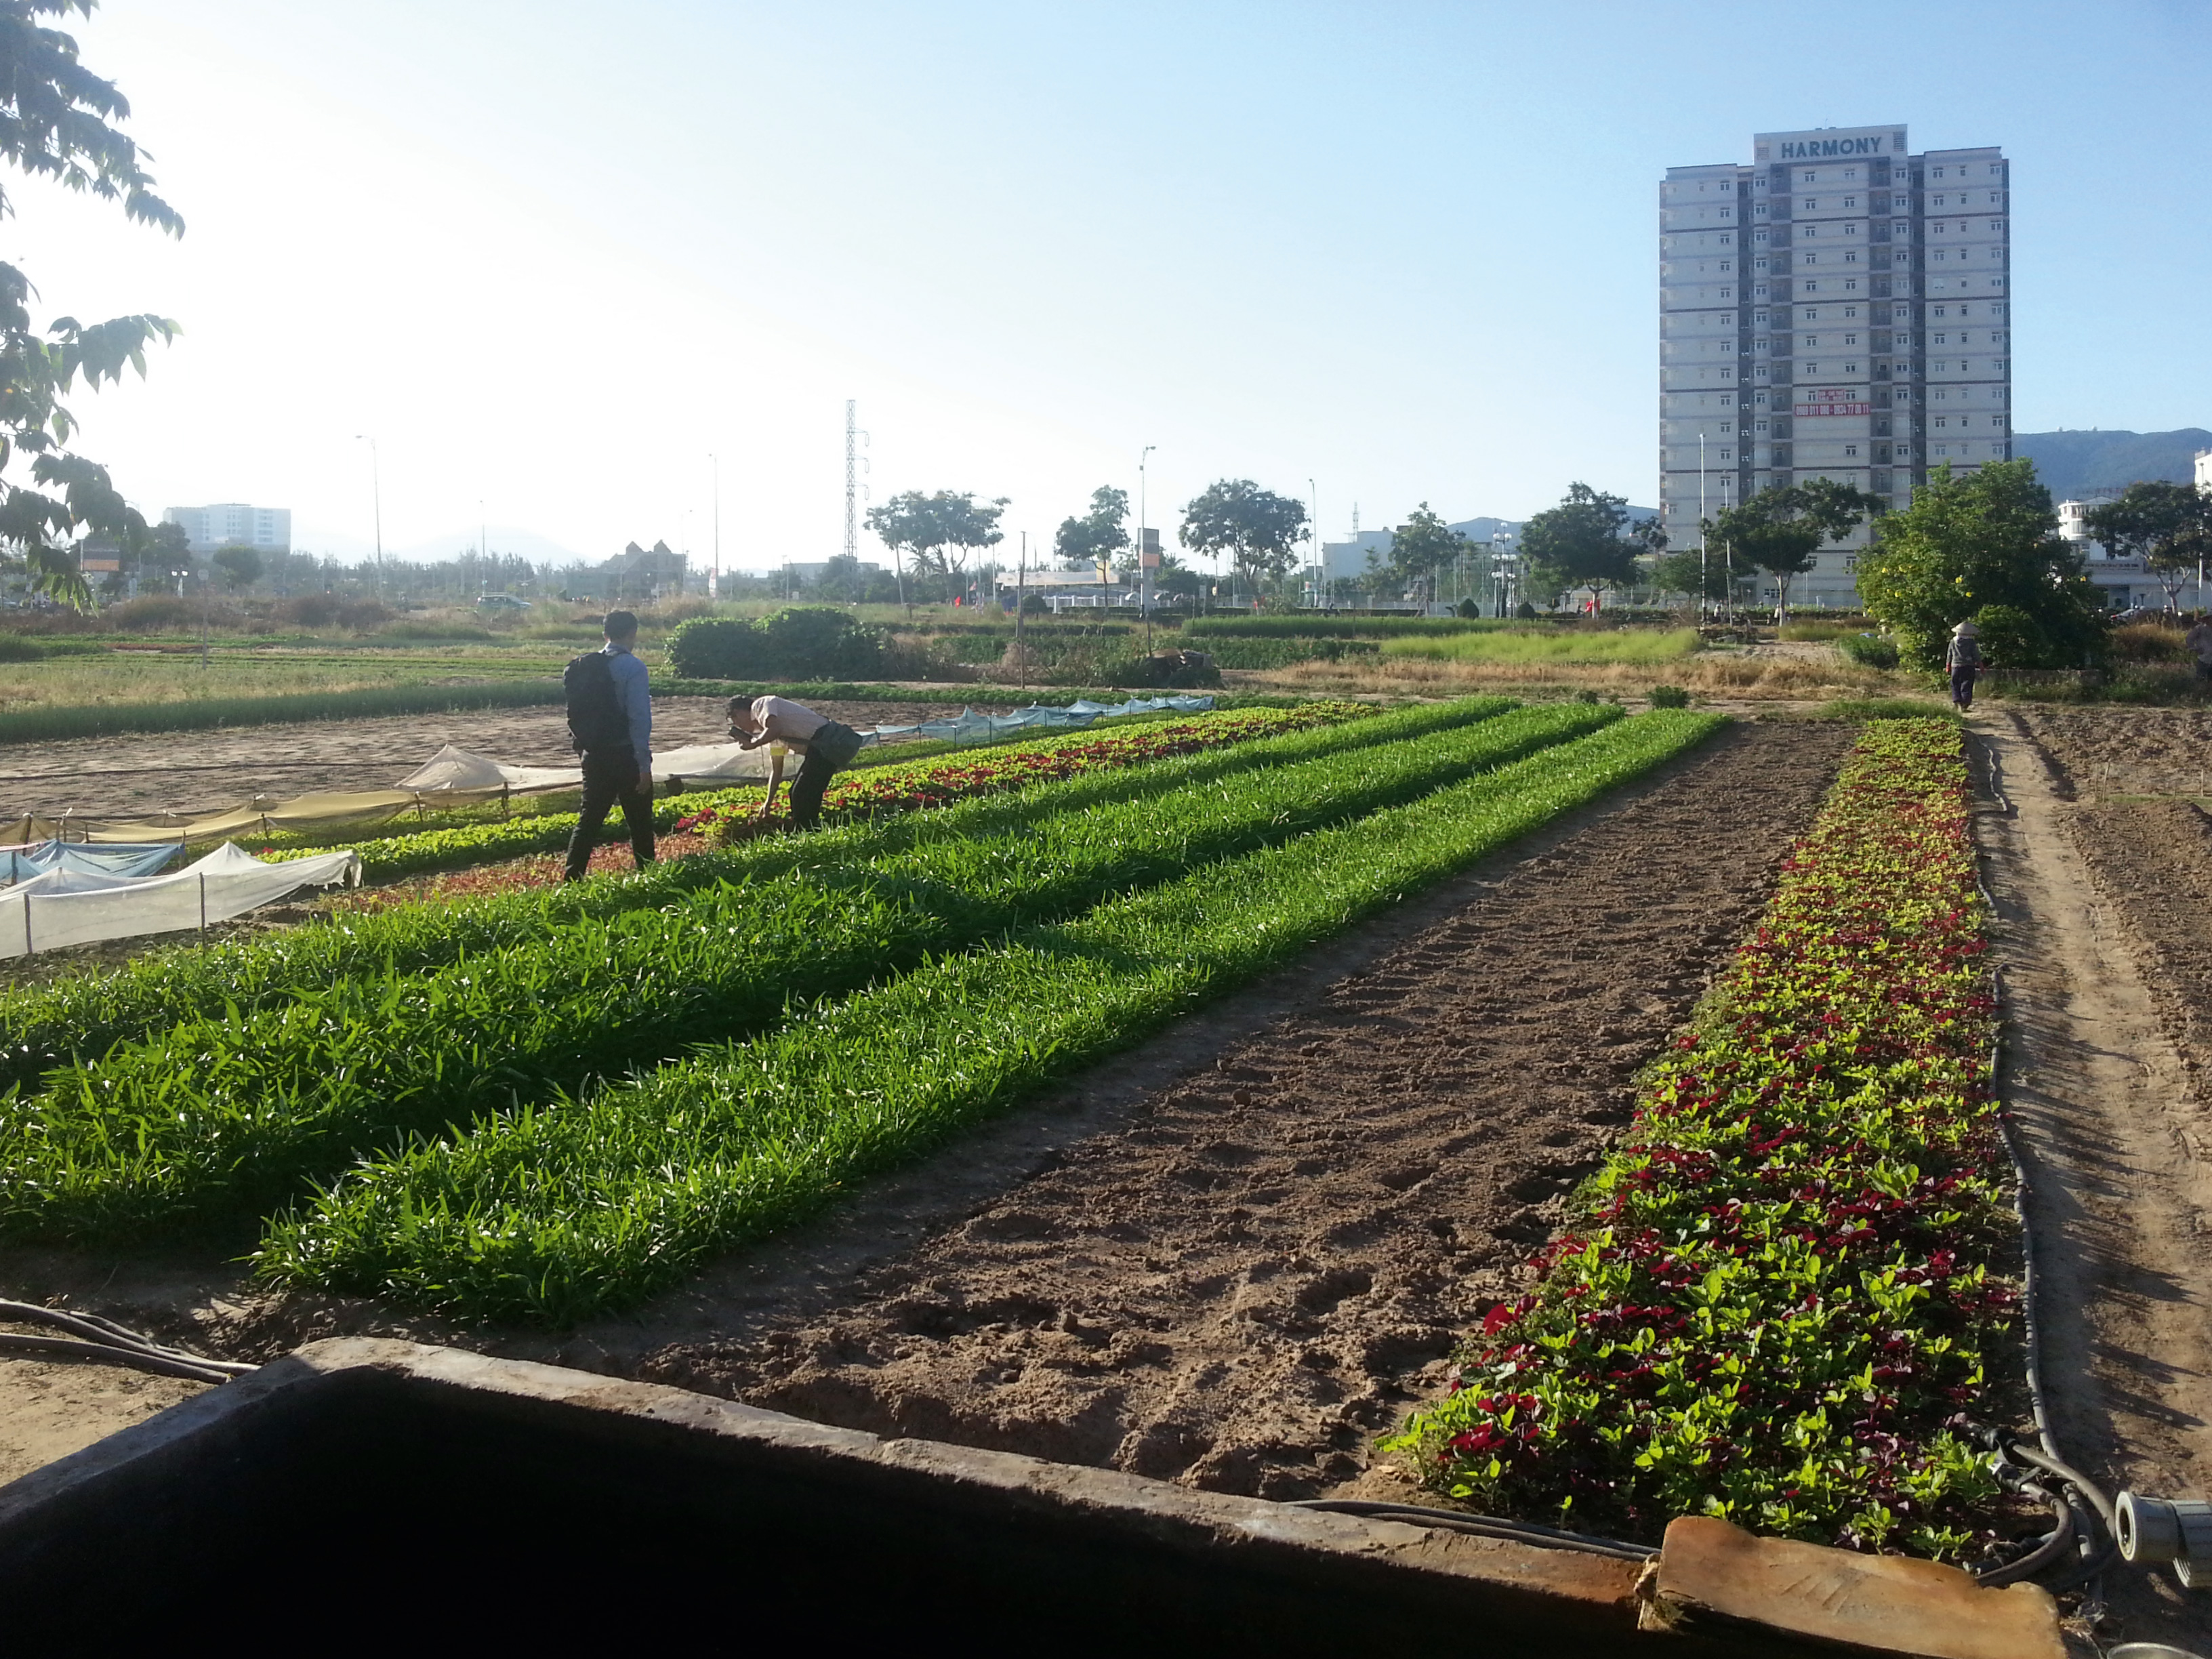 Agricultural land in the Vietnamese city of Da Nang: In the future, residents will be able to use purified wastewater to irrigate the beds.